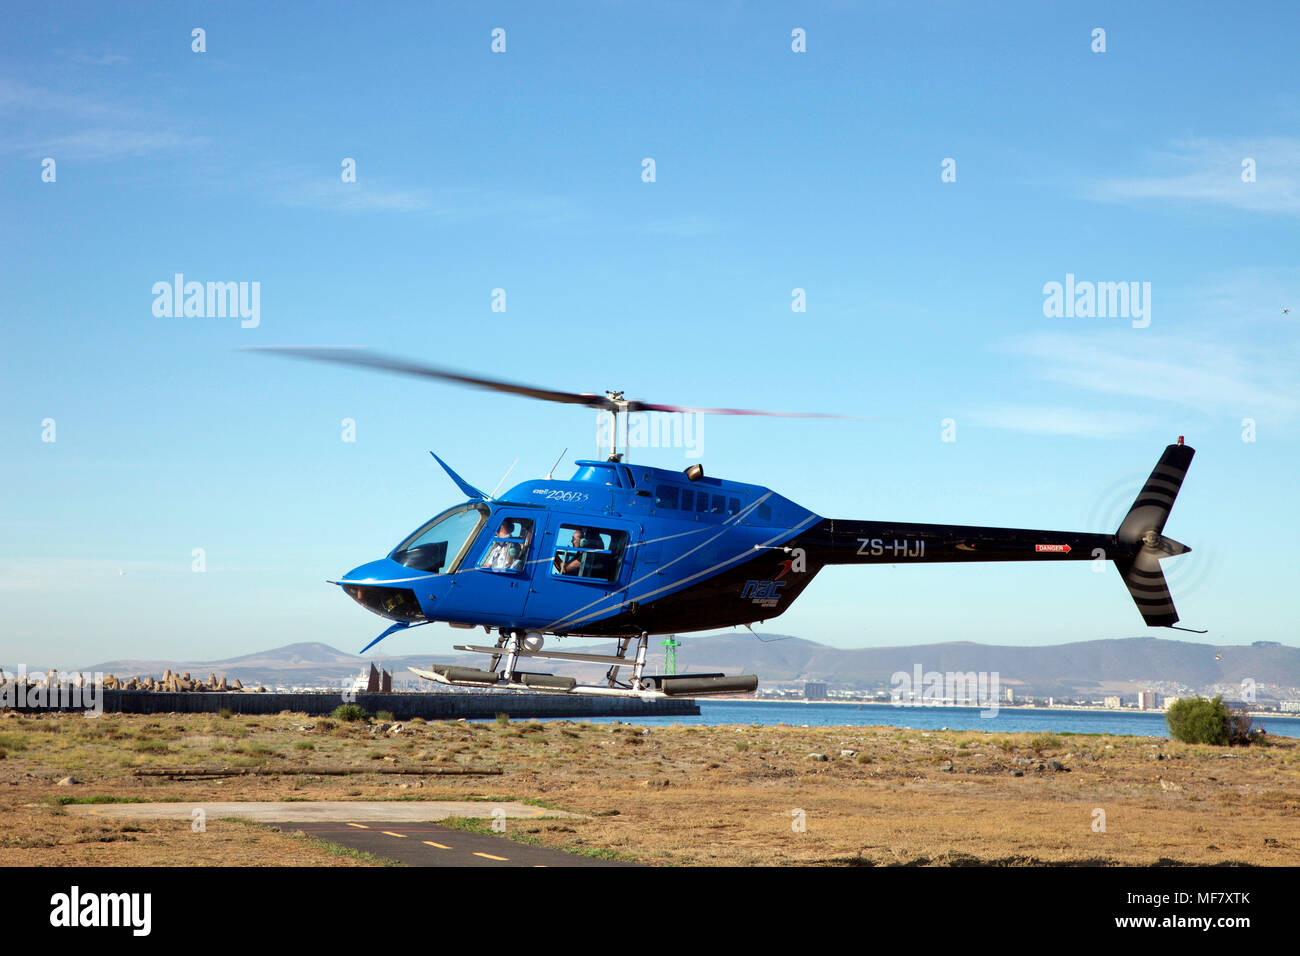 Nac helicopter sets off on a sightseeing tour of Cape Town, South Africa Stock Photo